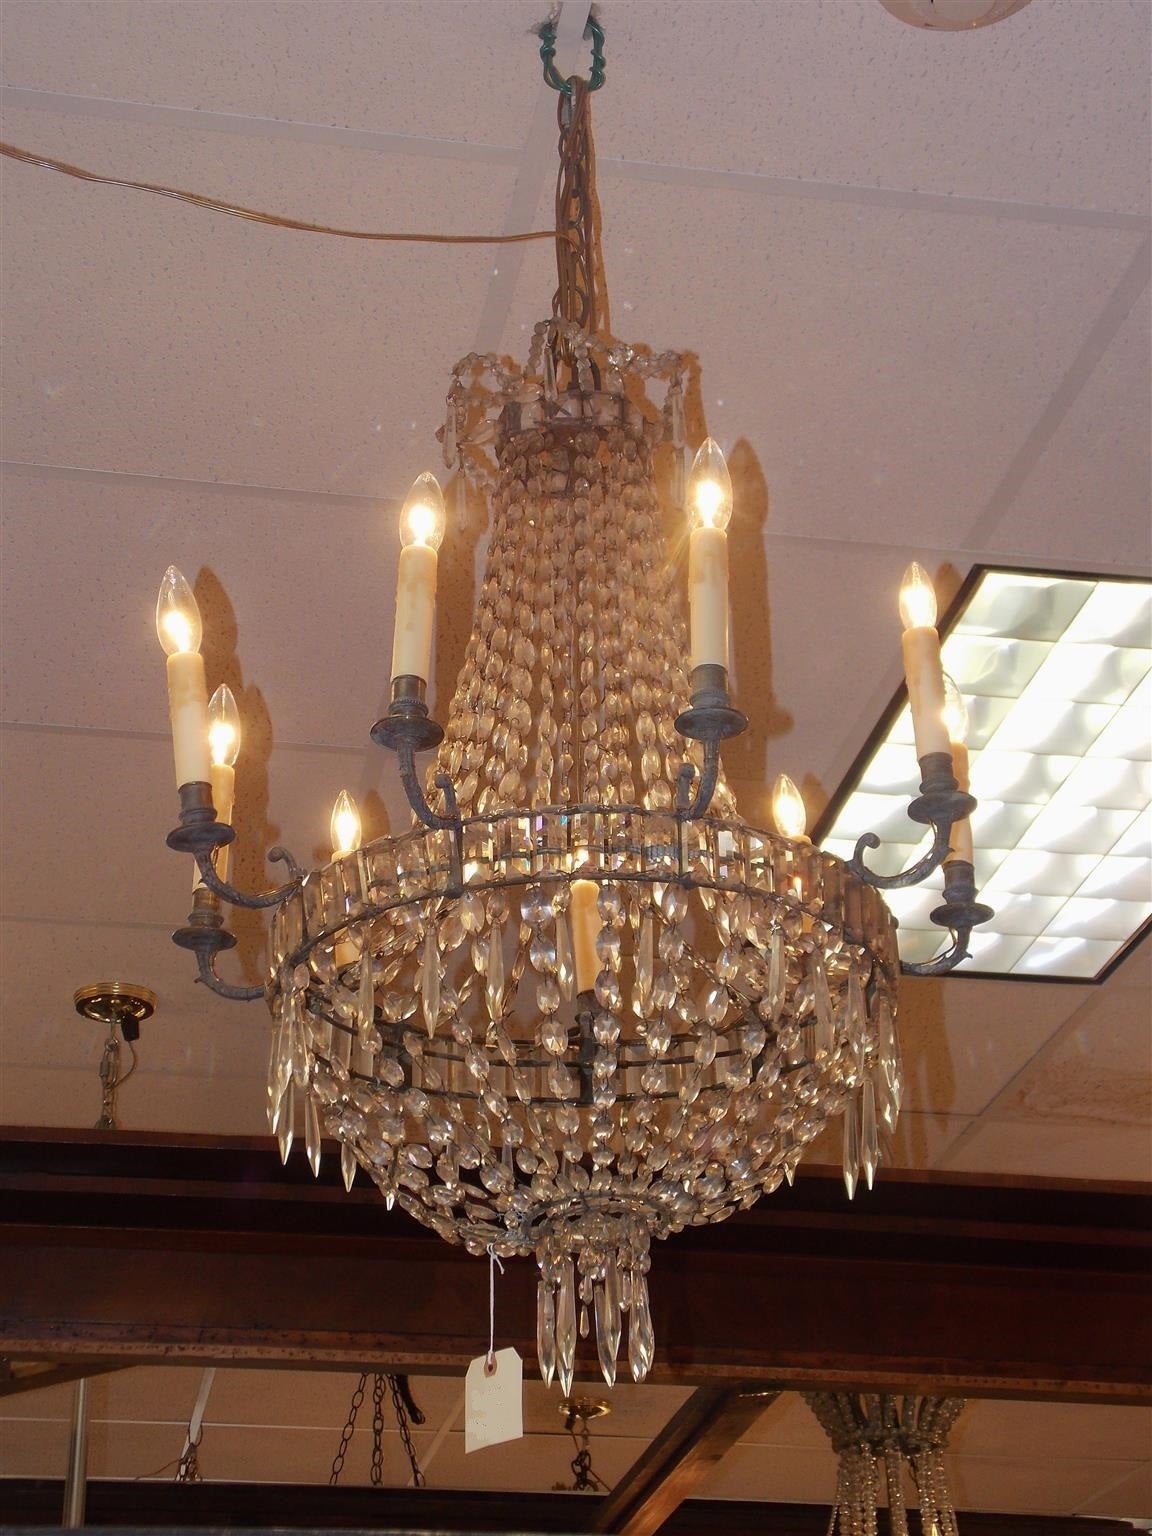 English Regency bronze and crystal nine-light chandelier with beaded and squared crystal canopy, cascading crystal strands, bronze floral motif scrolled arms, and terminating with a lower decorative crystal basket, Early 19th century. Chandelier was